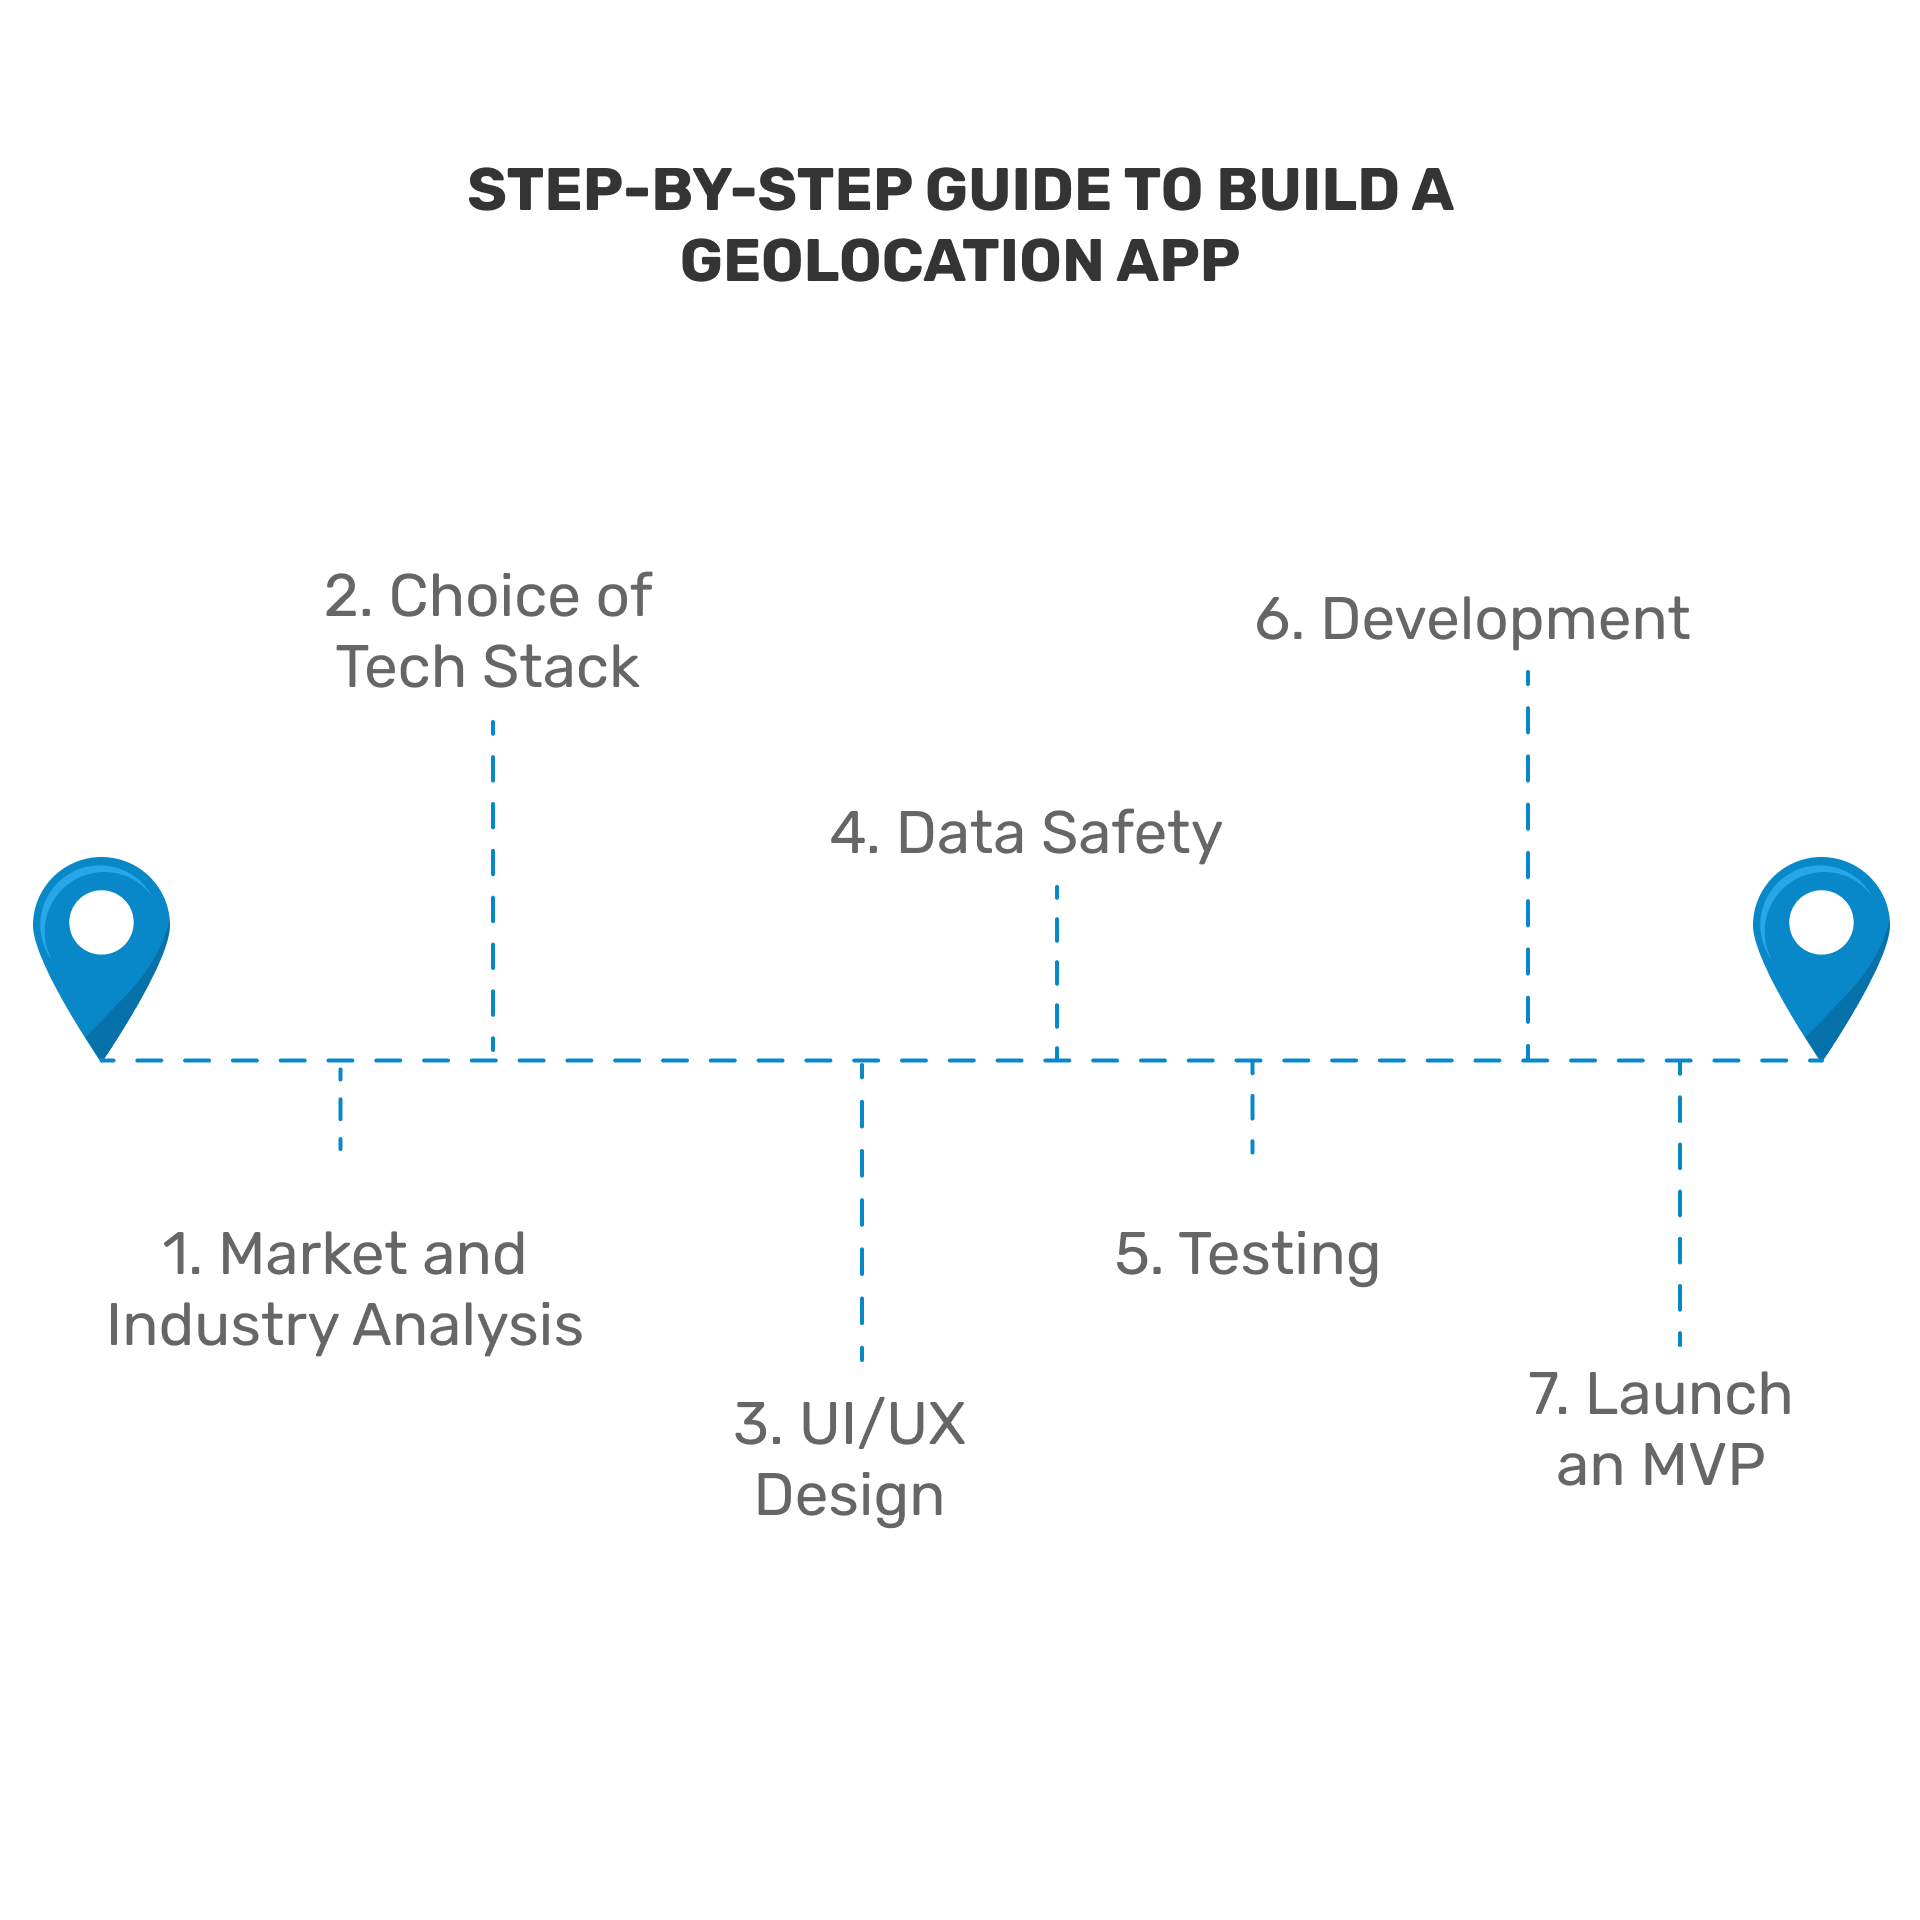 Steps to build a geolocation app: start with planning, research the market, and find a trusted software development partner.